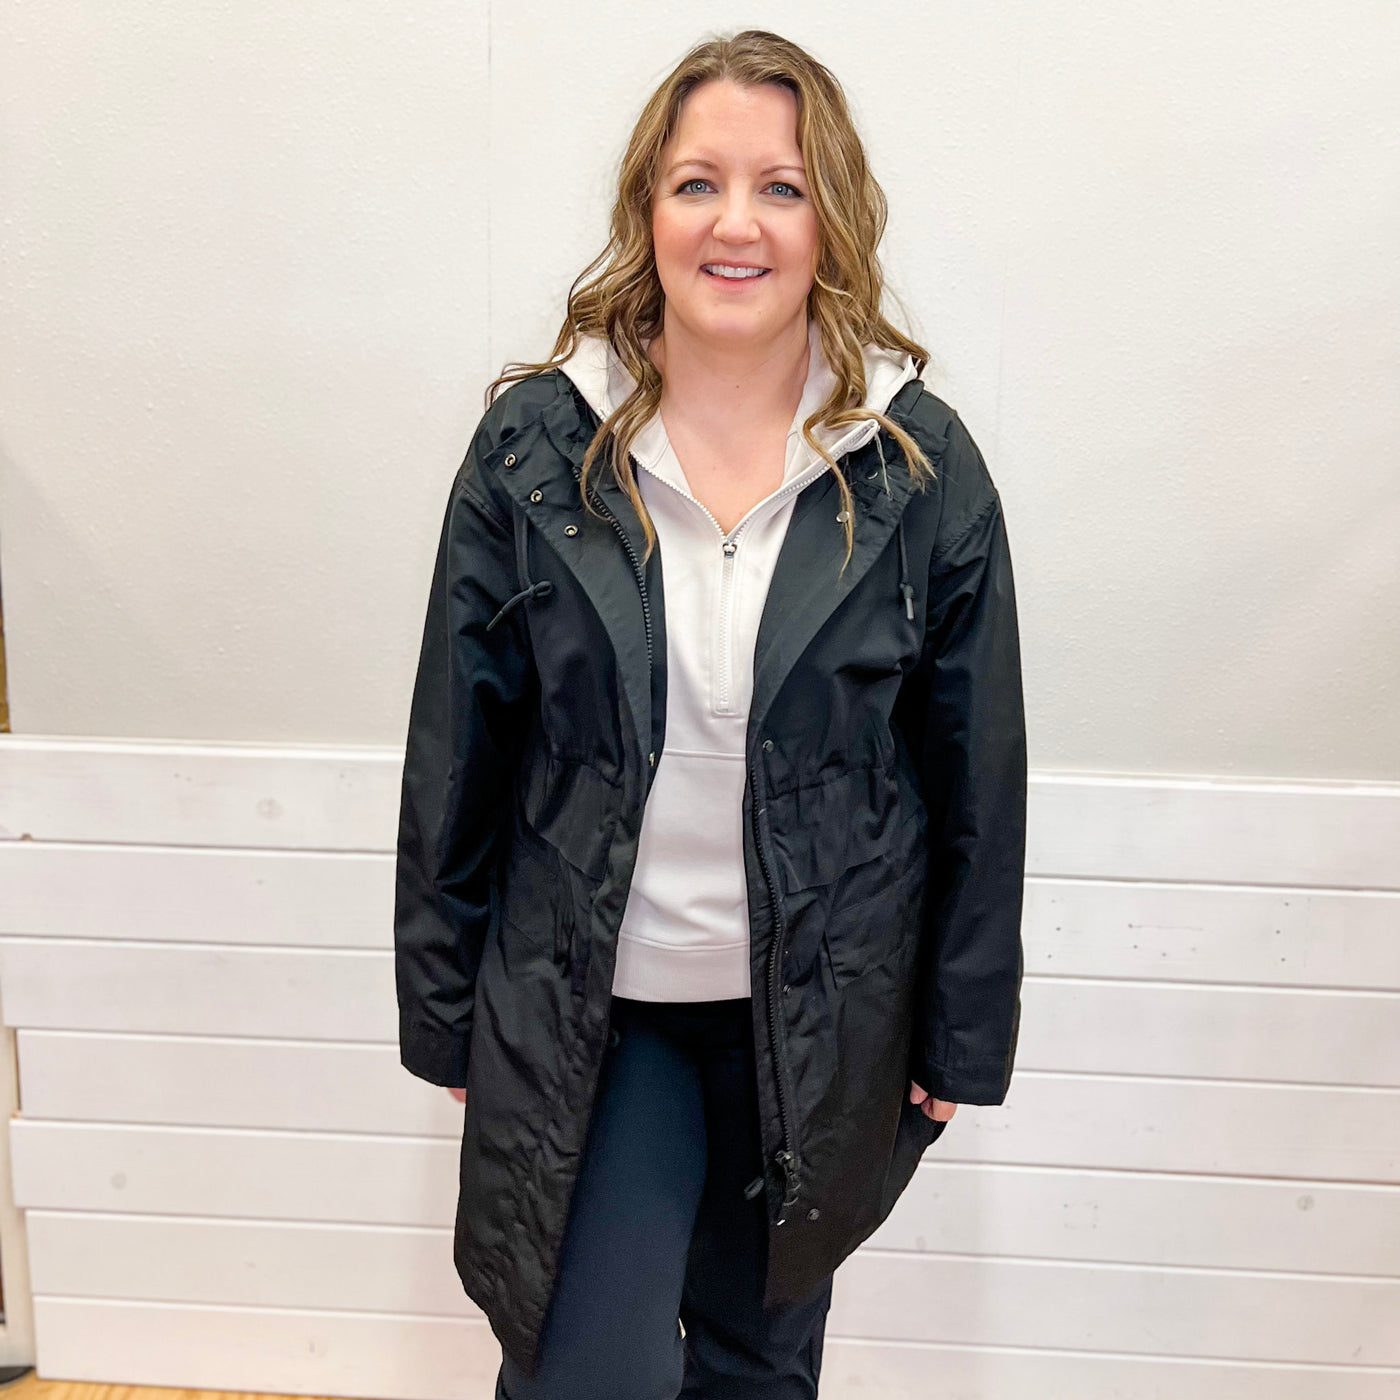 Spring jacket. Black rain jacket. Spring rain jacket. Magpie Designs is a boutique women's clothing and gift store located in downtown Gillette, Wyoming 